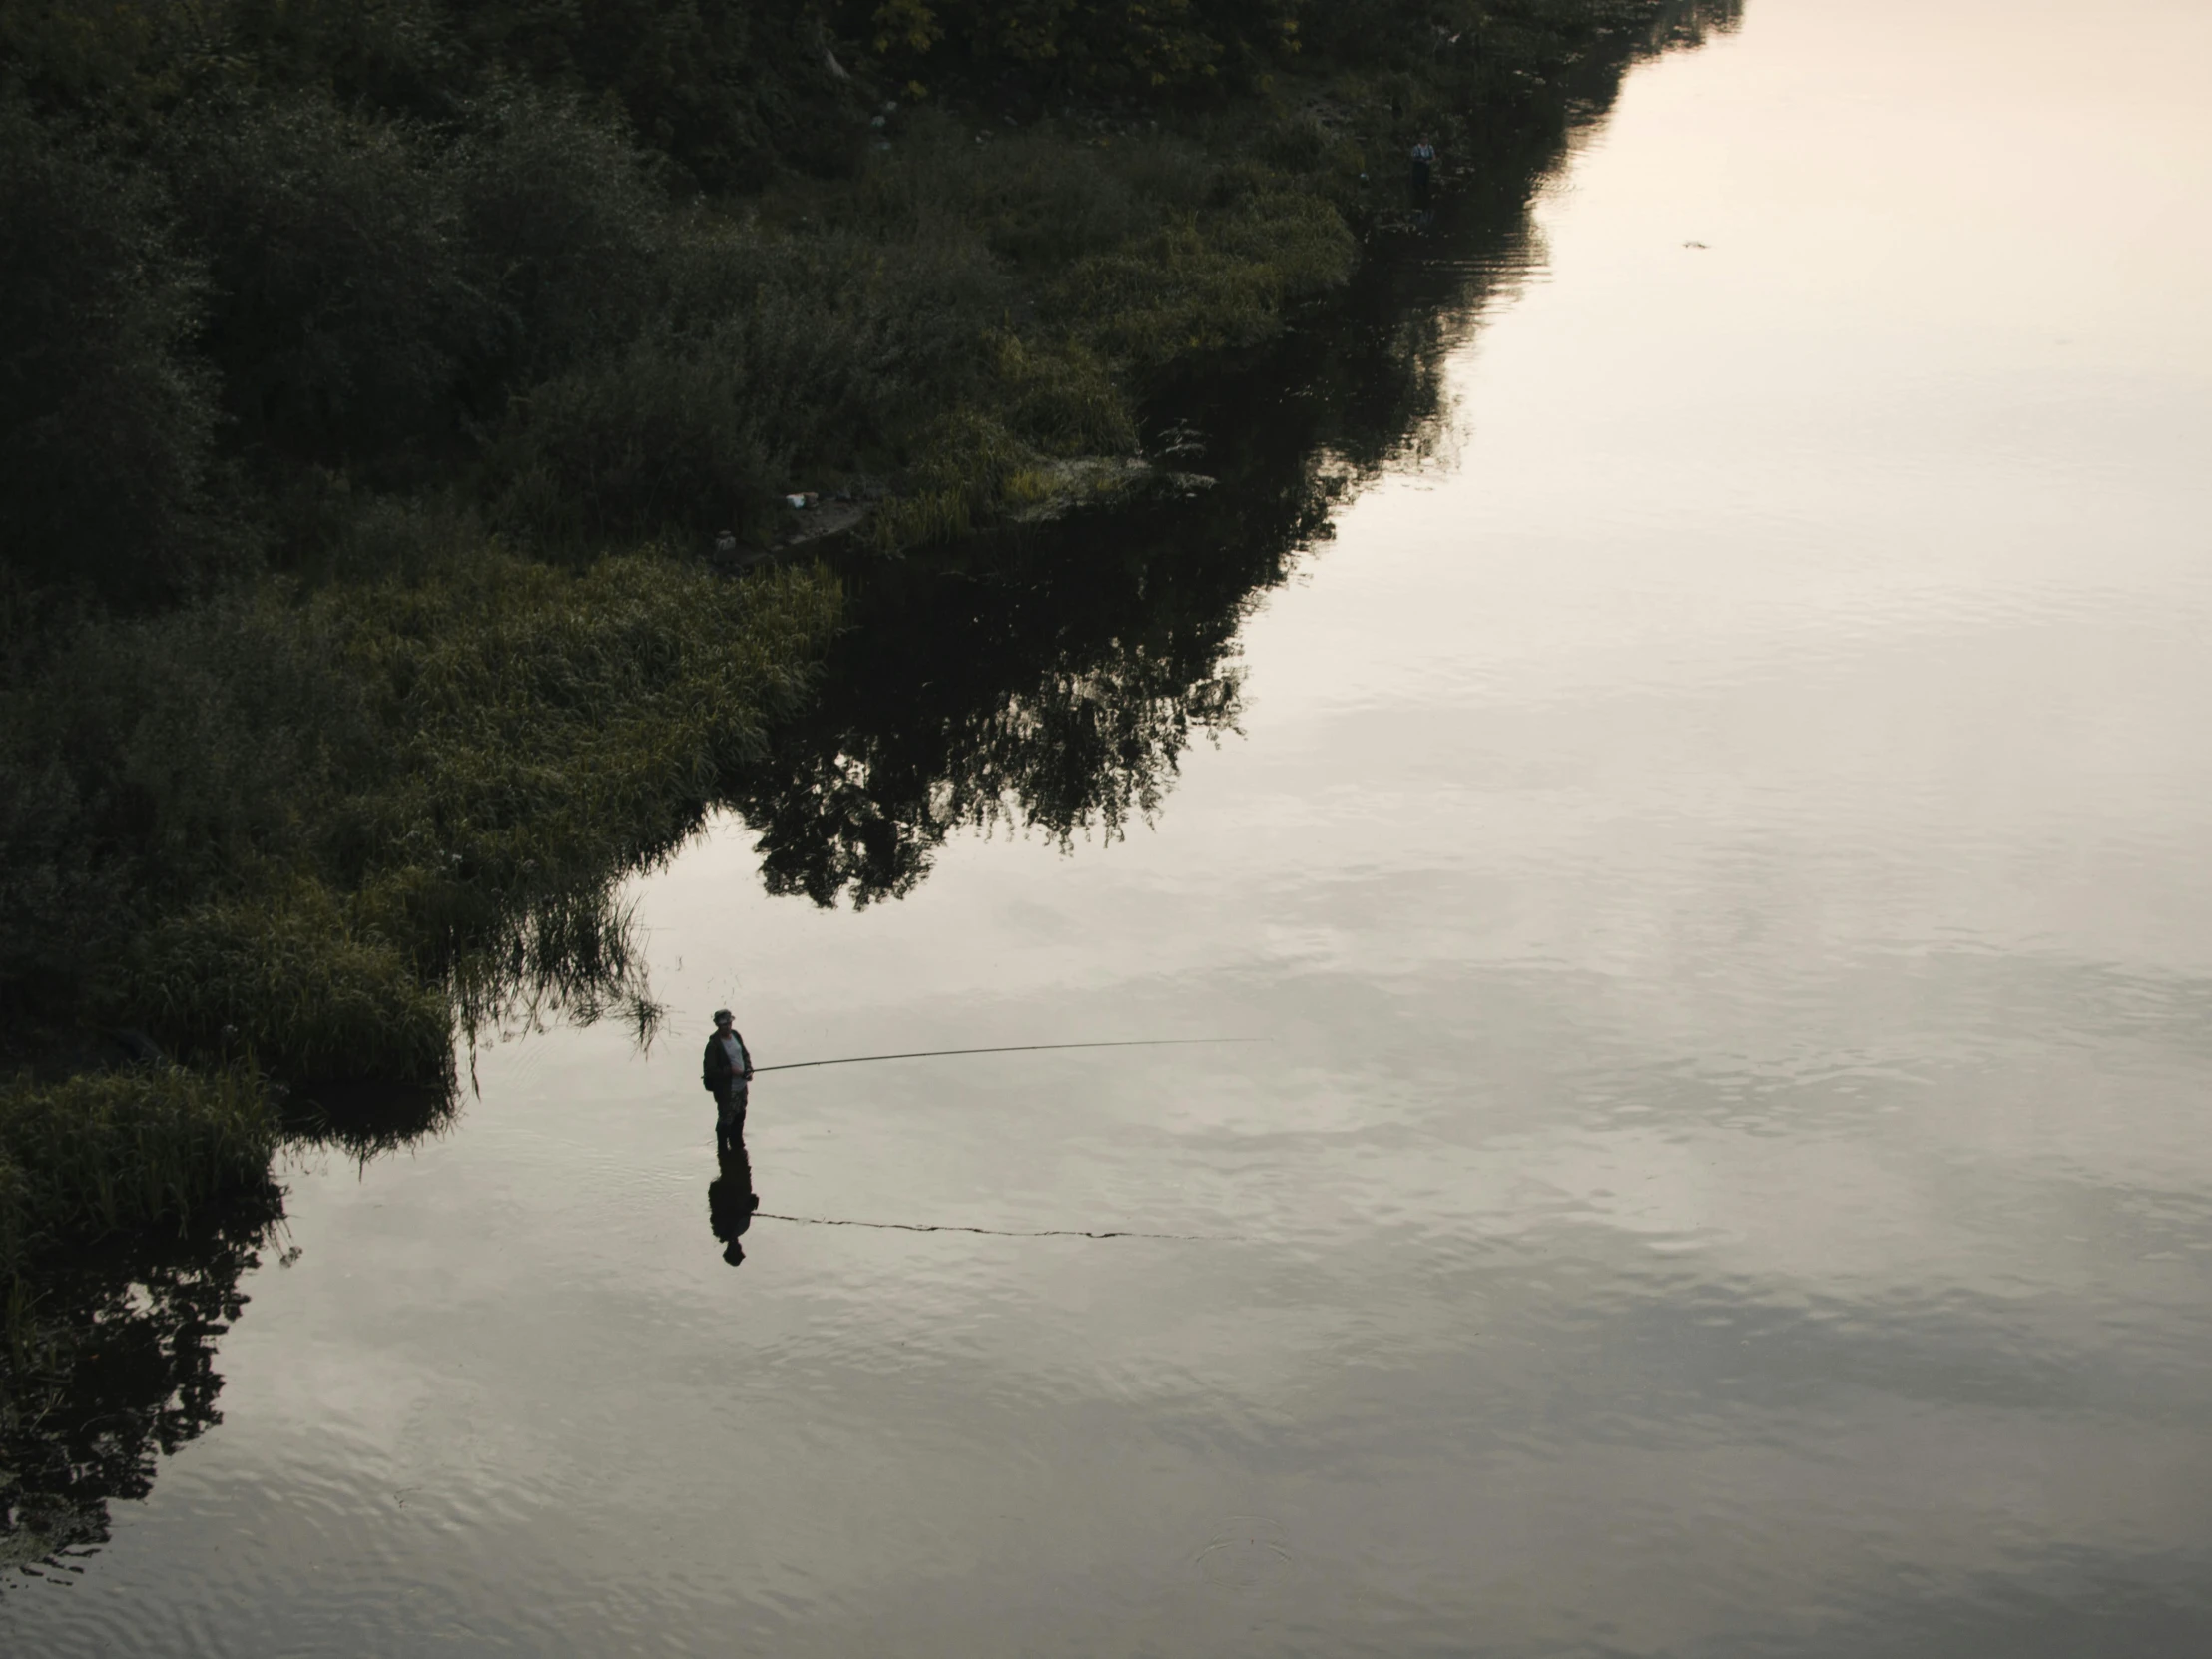 two men are fishing on the water while another man stands next to him